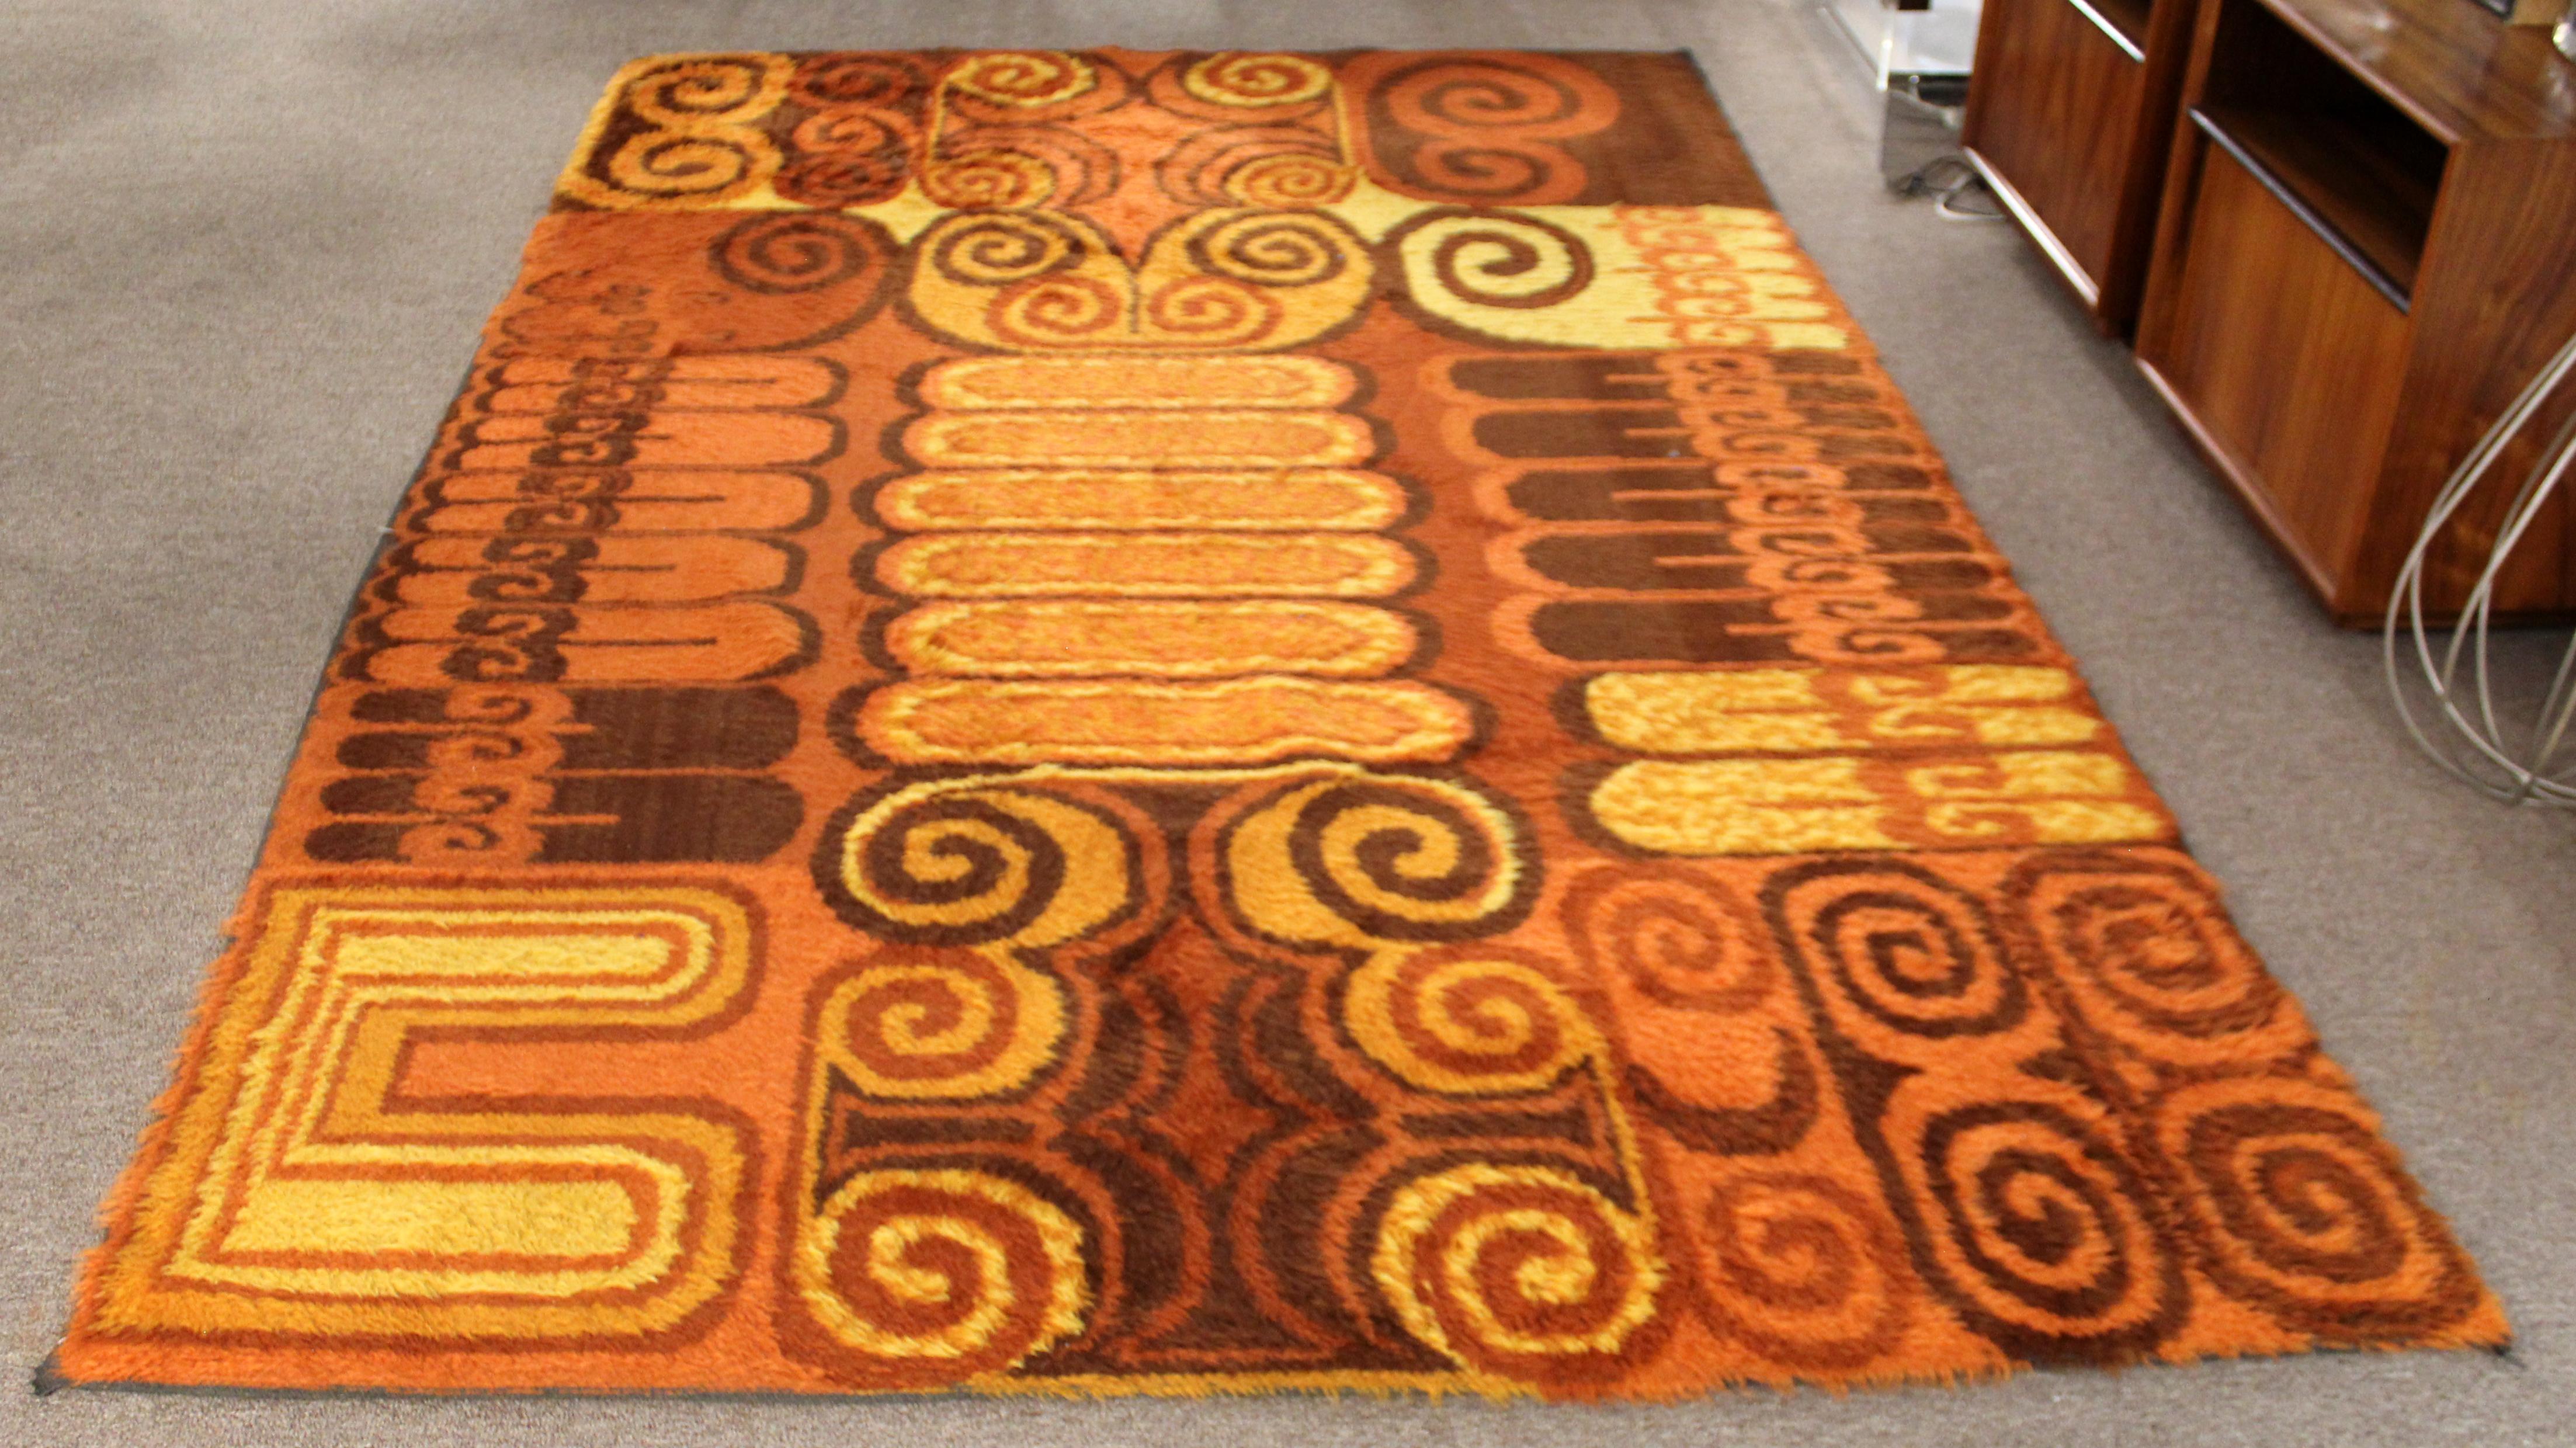 For your consideration is a fabulously groovy, orange patterned rya wool, shag rug, circa 1970s. In very good vintage condition. The dimensions are 71